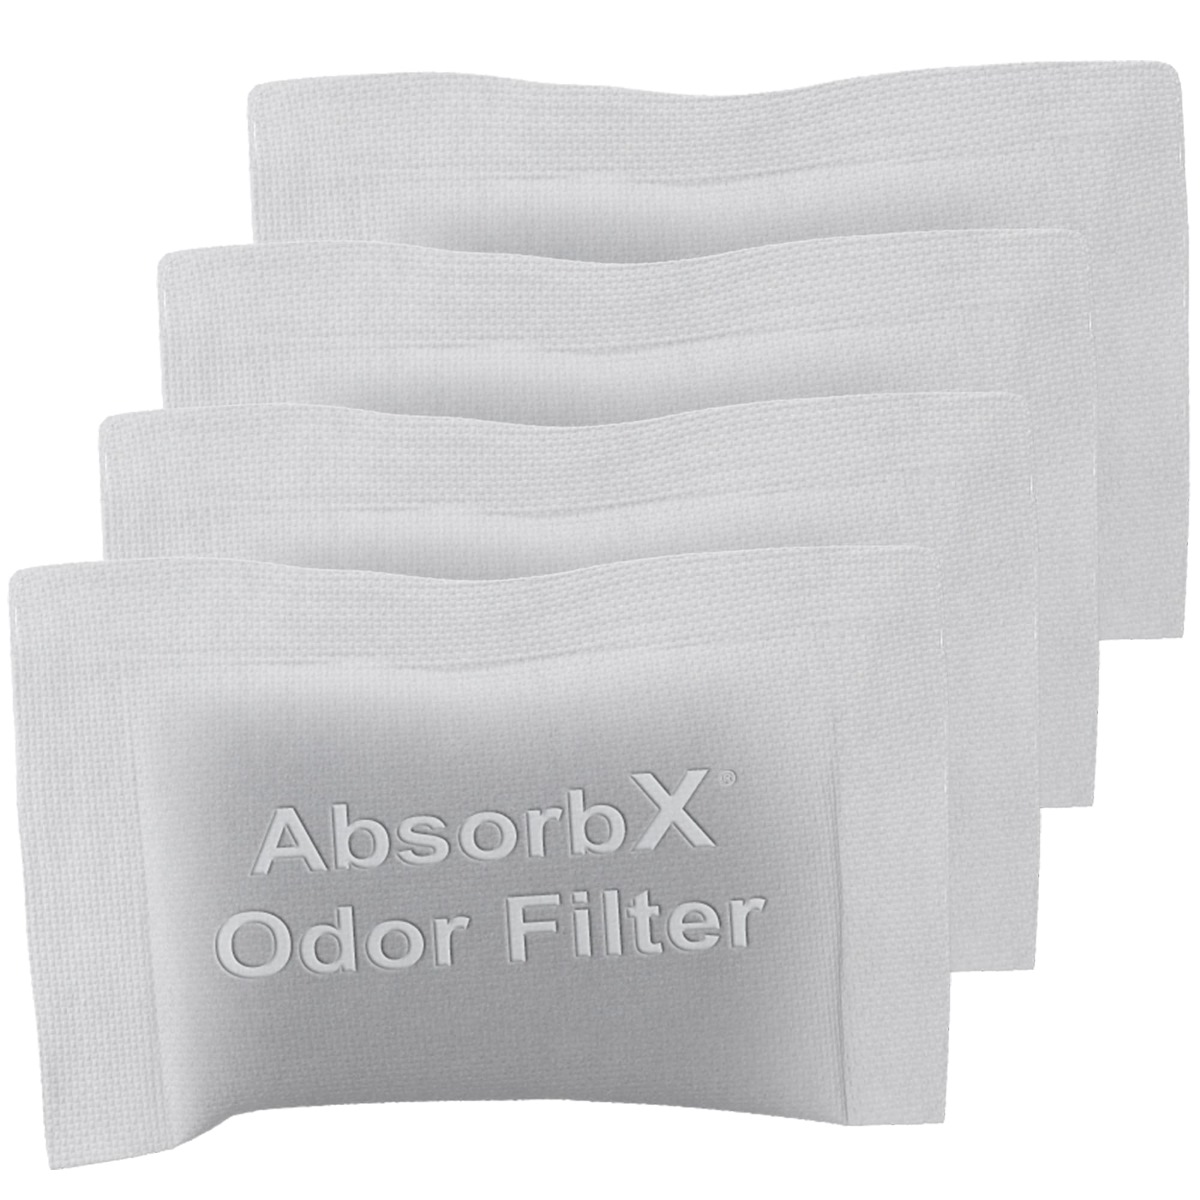 What Is ITouchless Deodorizer Filter